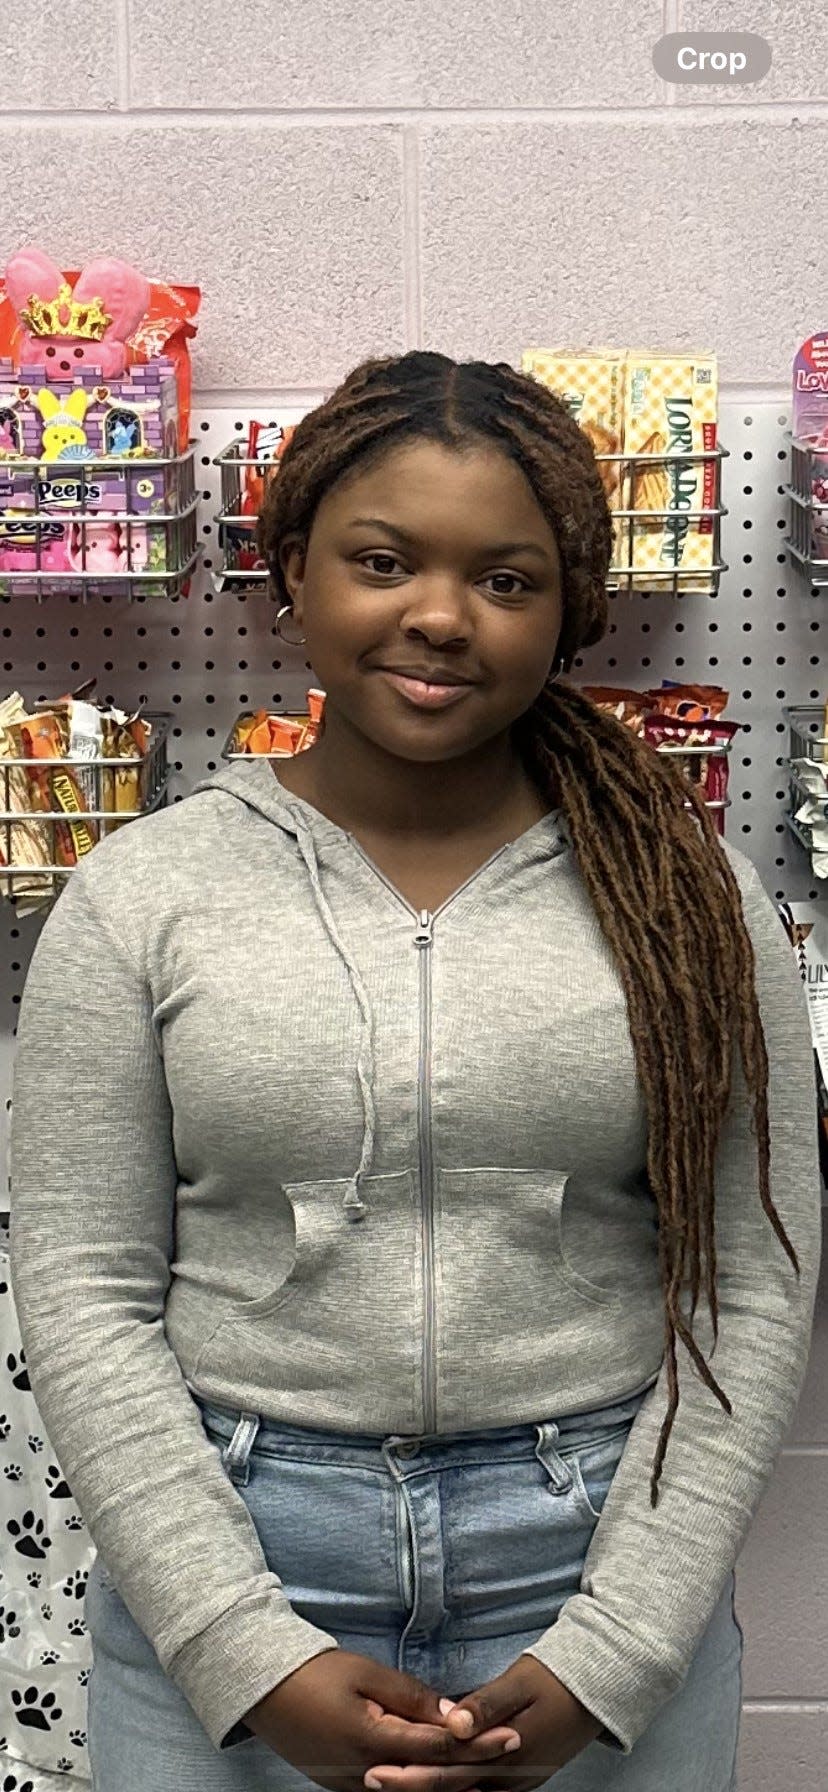 Jaida Ackeifi, a junior at Monty Tech, joined forces with Katy Whitaker, the school's development coordinator, to establish the Nook, a pantry that will provide students with food and hygiene items free of charge.